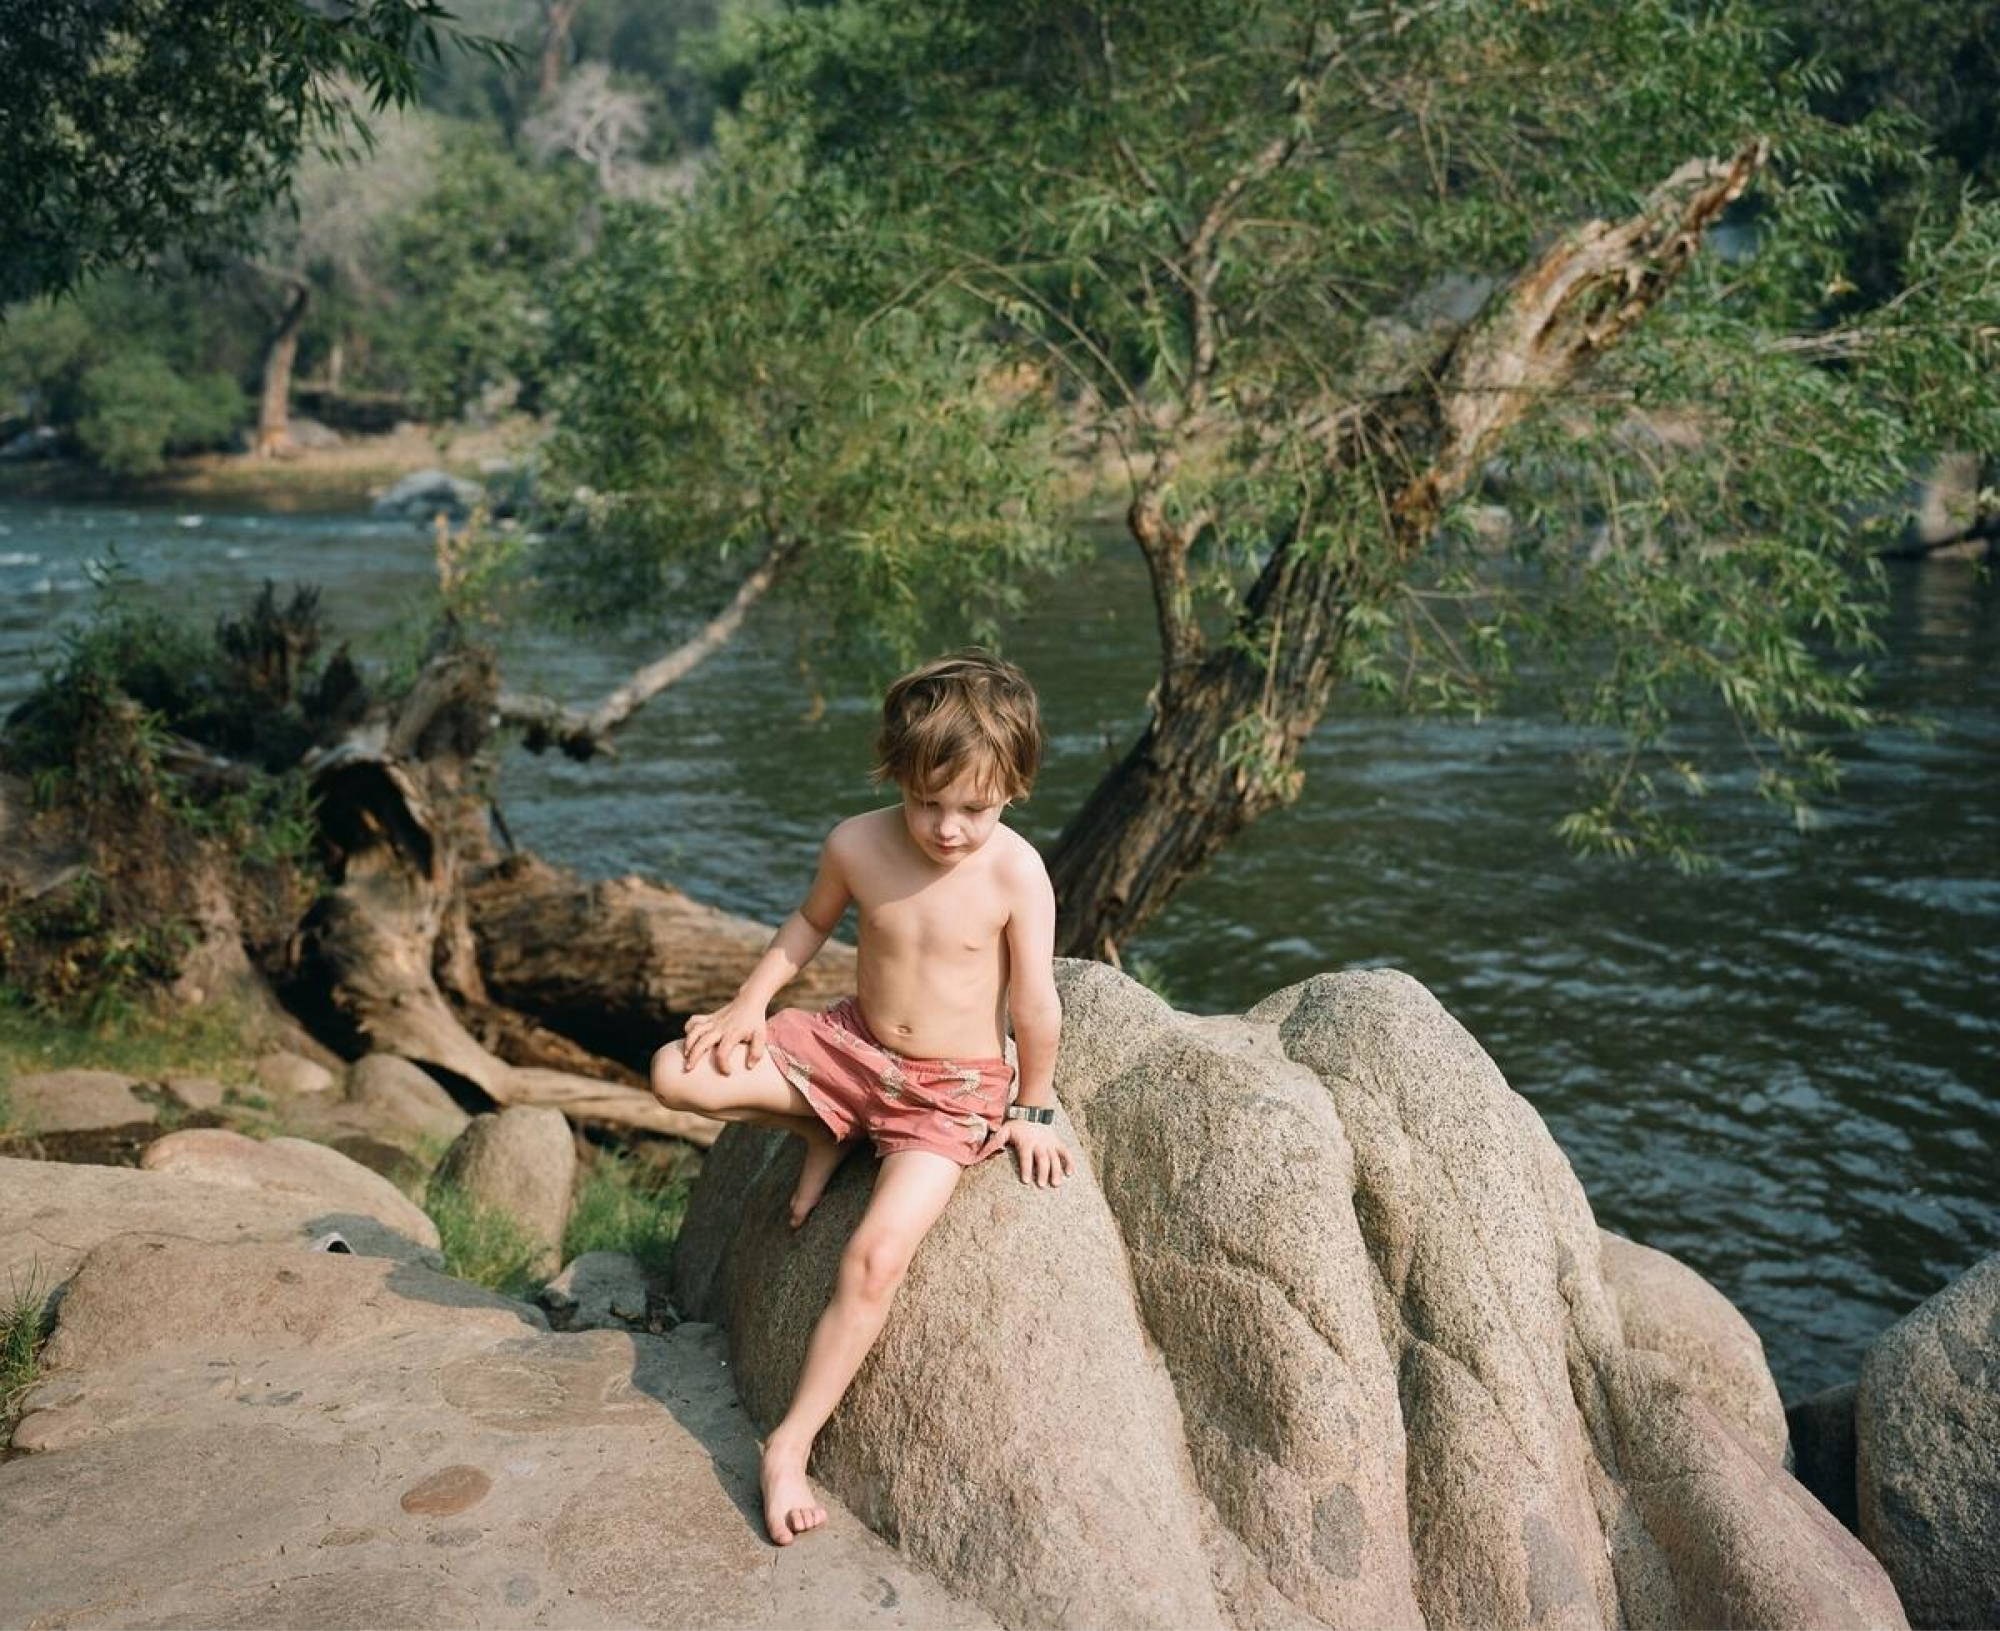 A young boy wearing swim trunks sits on a rock near a body of water.